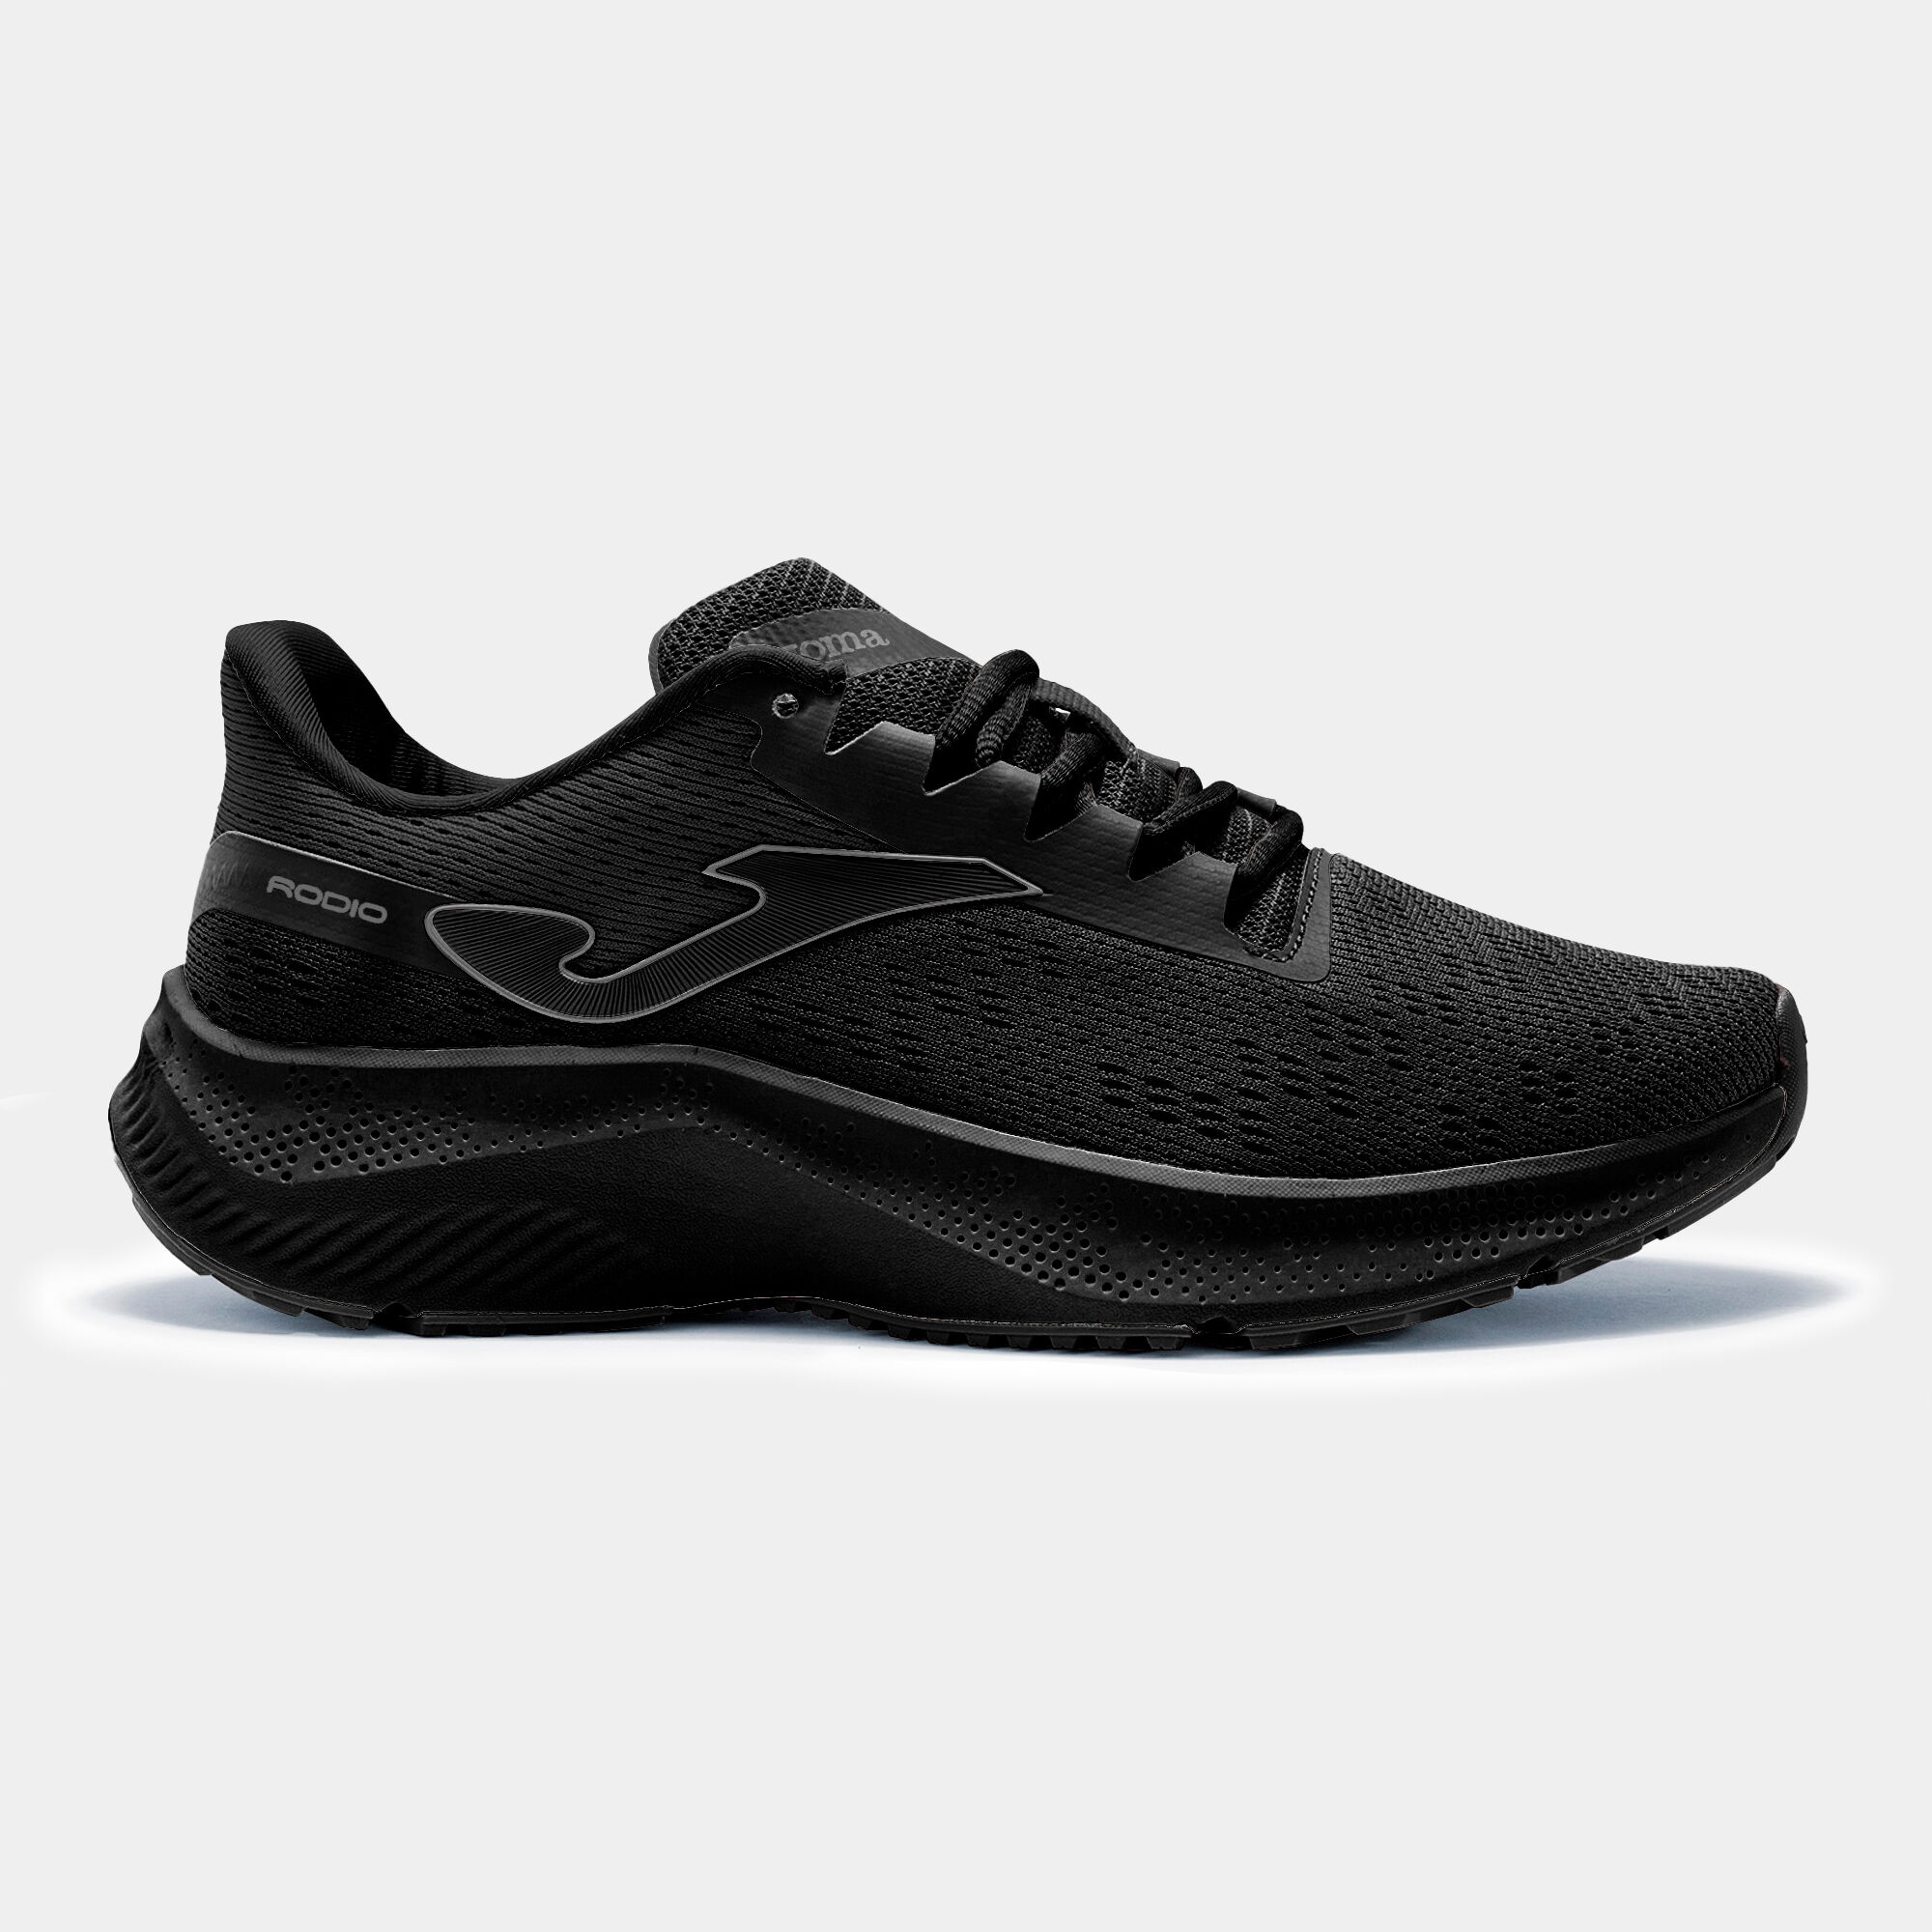 Running shoes Rodio 22 woman black